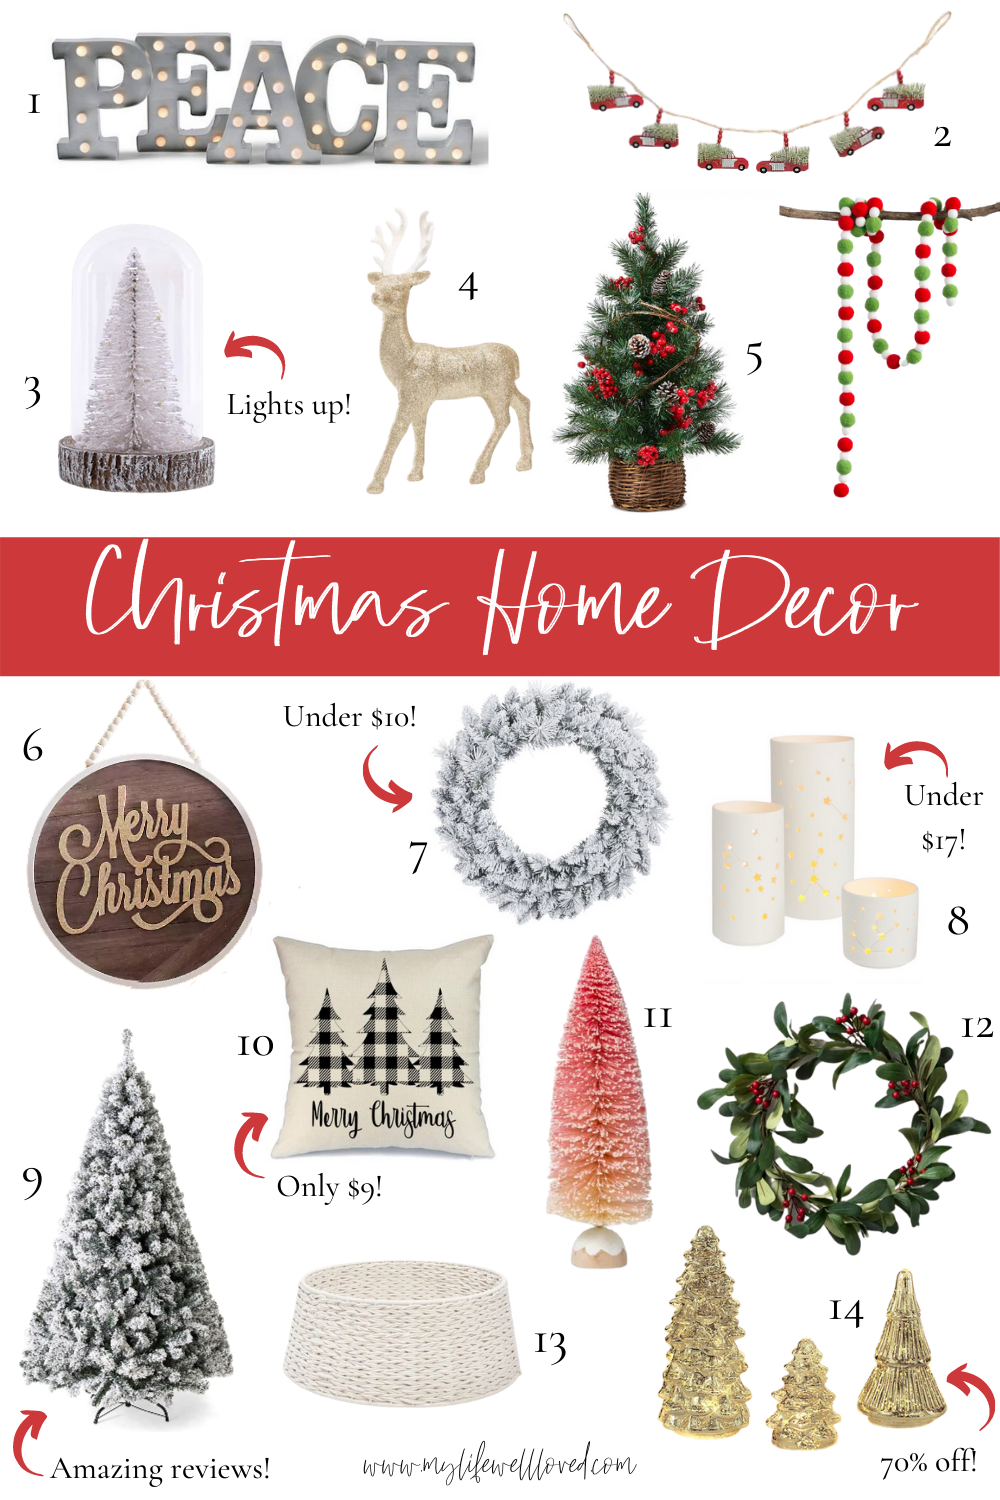 Top 10 Festive Amazon Christmas Decorations - Healthy By Heather Brown